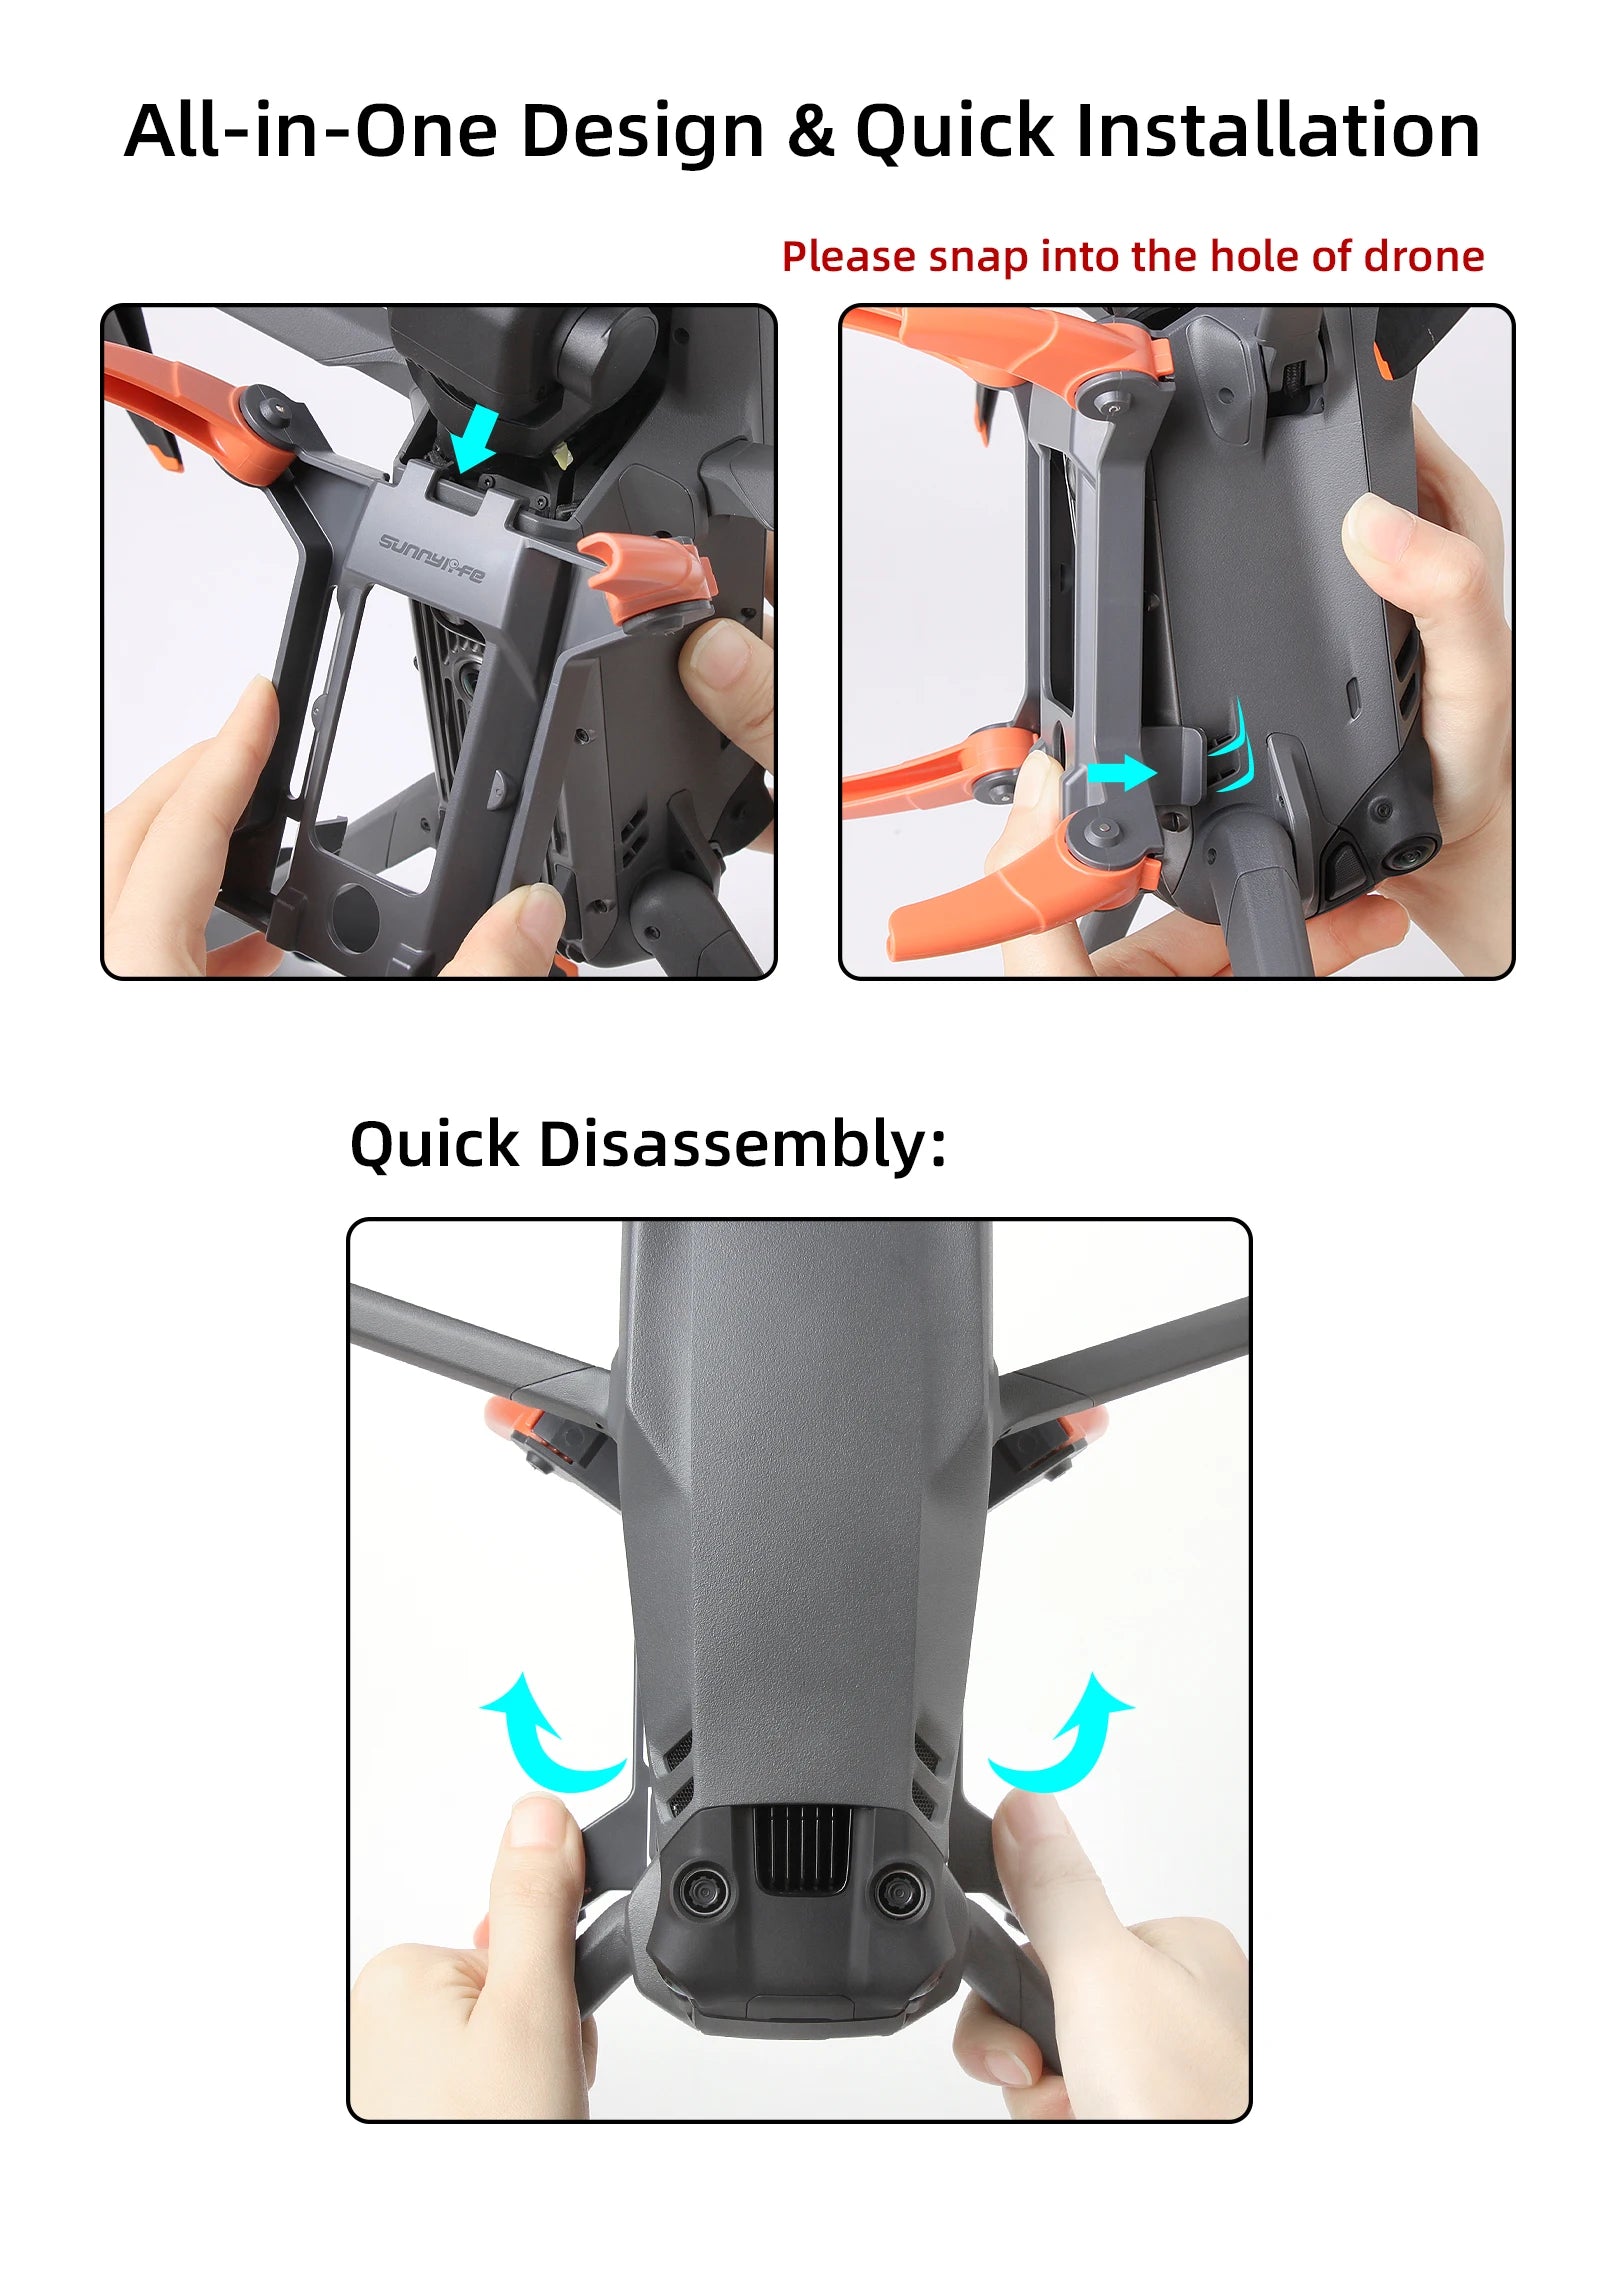 All-in-One Design & Quick Installation Please snap into the hole of drone .